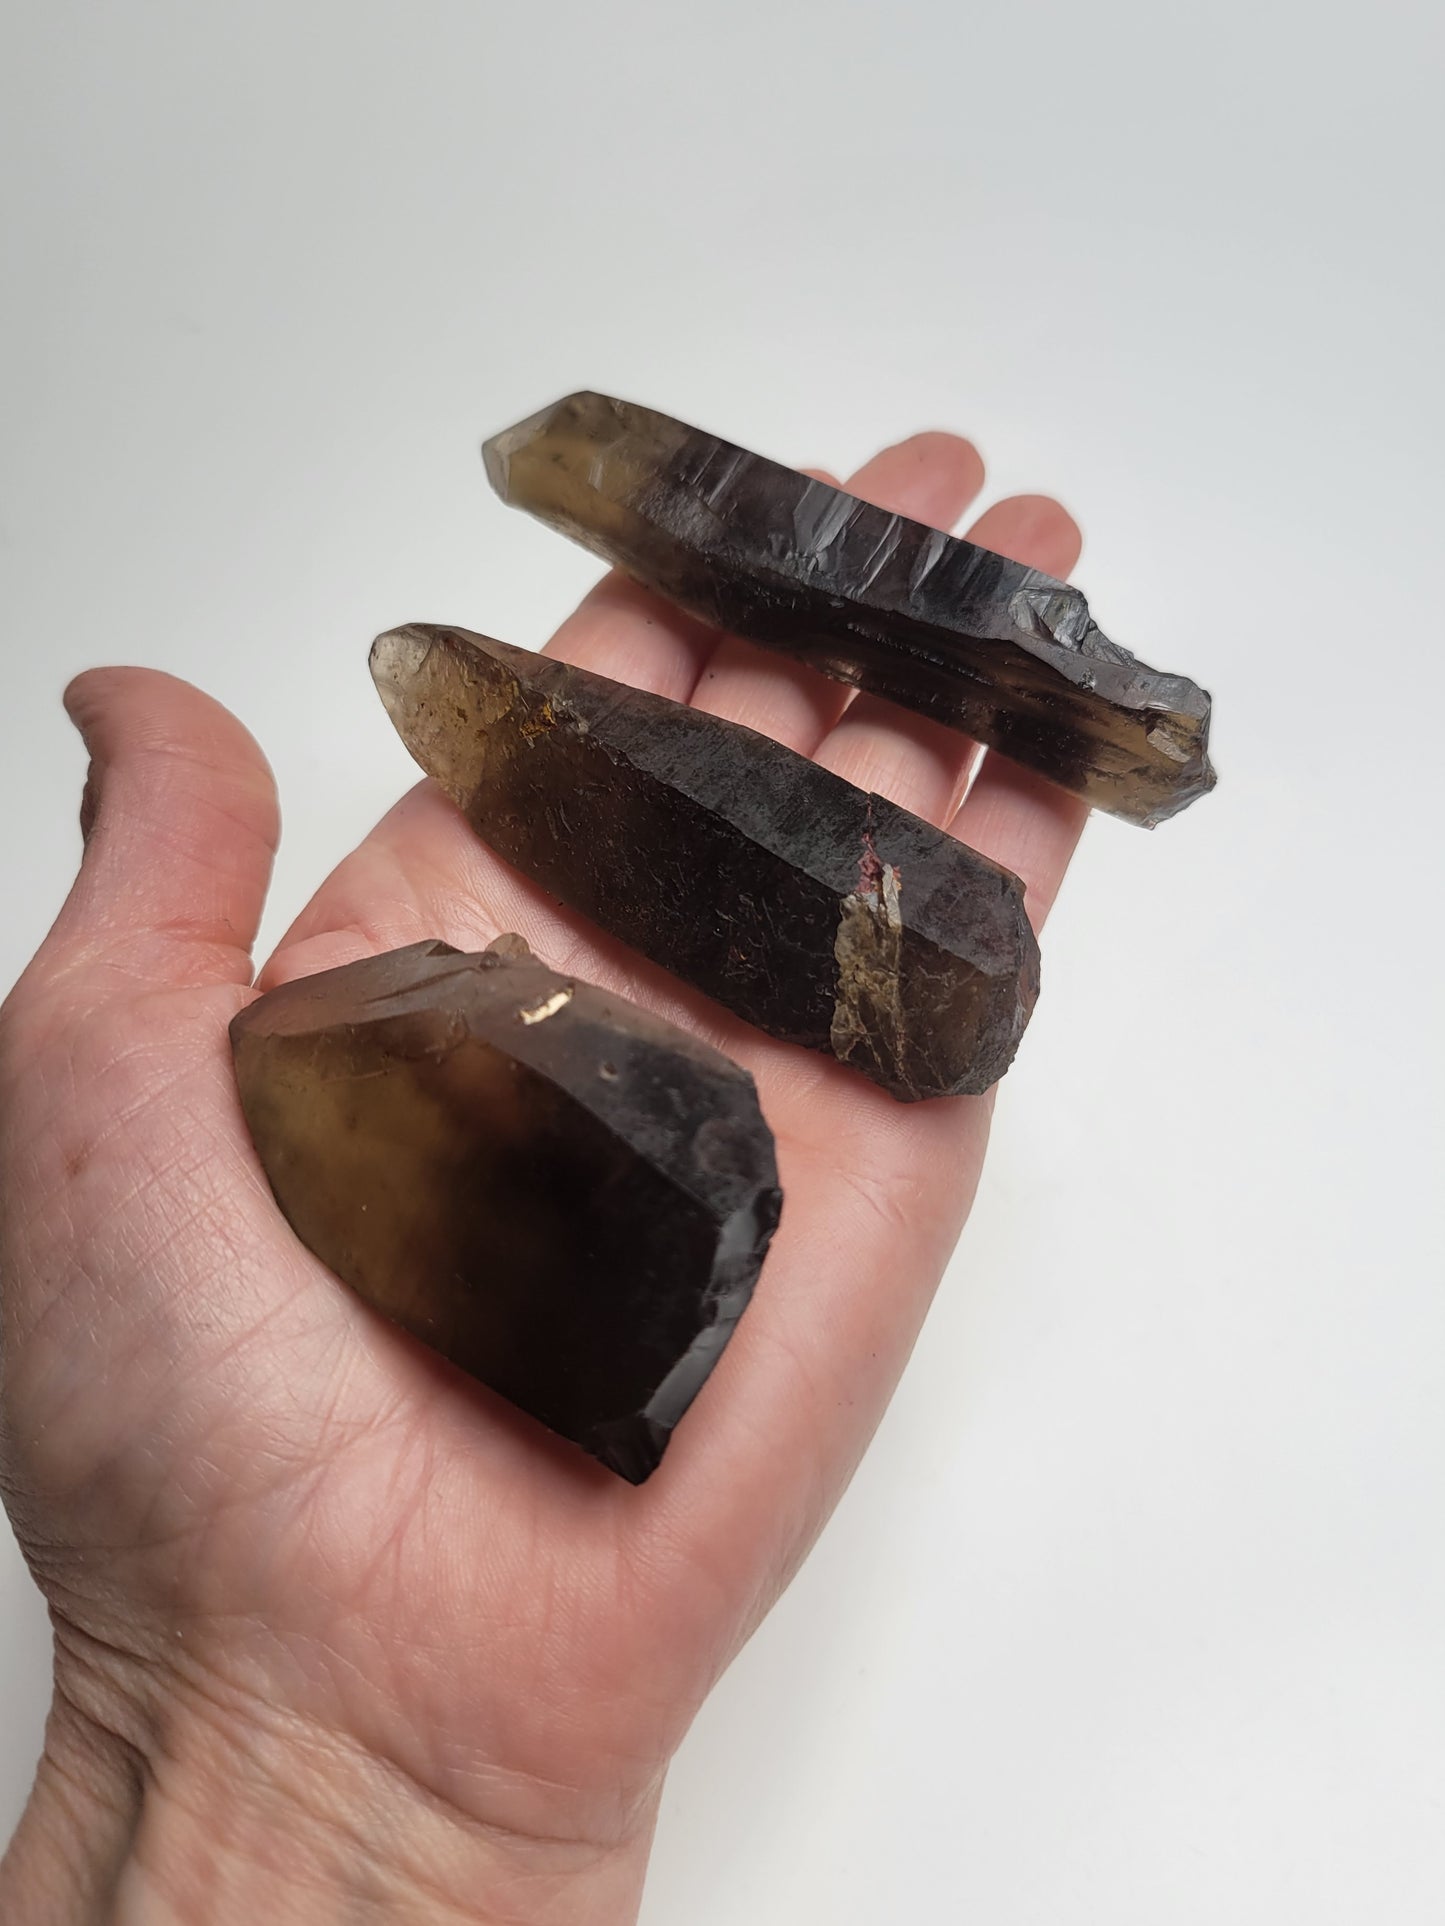 Smokey Citrine Specimen TRIO from Diamantina, Brazil (Lengths: 3 7/8 inches, 3 1/8 inches, 2 1/4 inches)